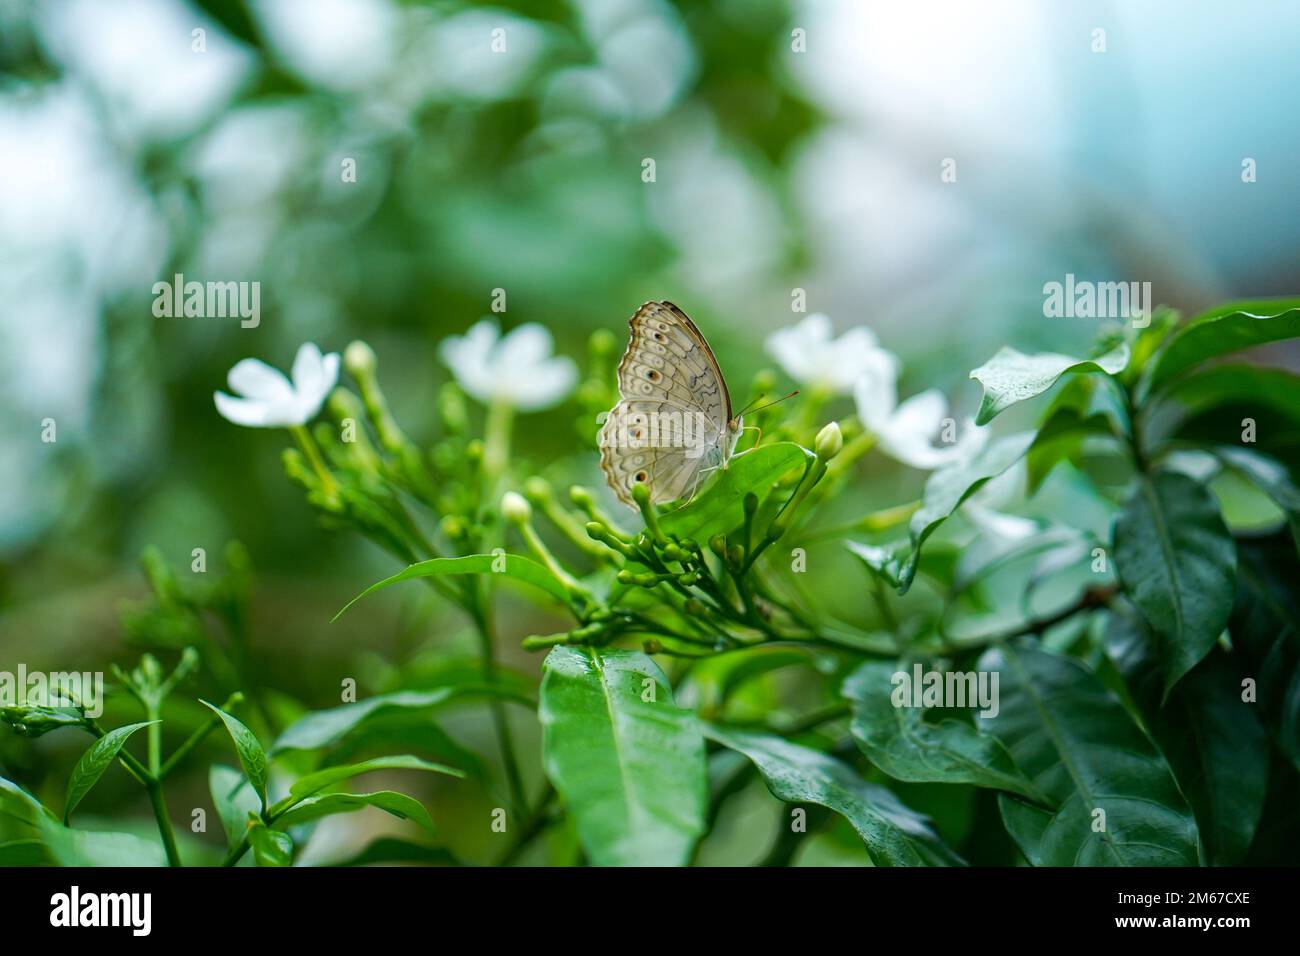 Close up Macro image of a beautiful White peacock butterfly siting on leaf with blurred background, beautiful butterfly sitting on leaf of a plant or Stock Photo